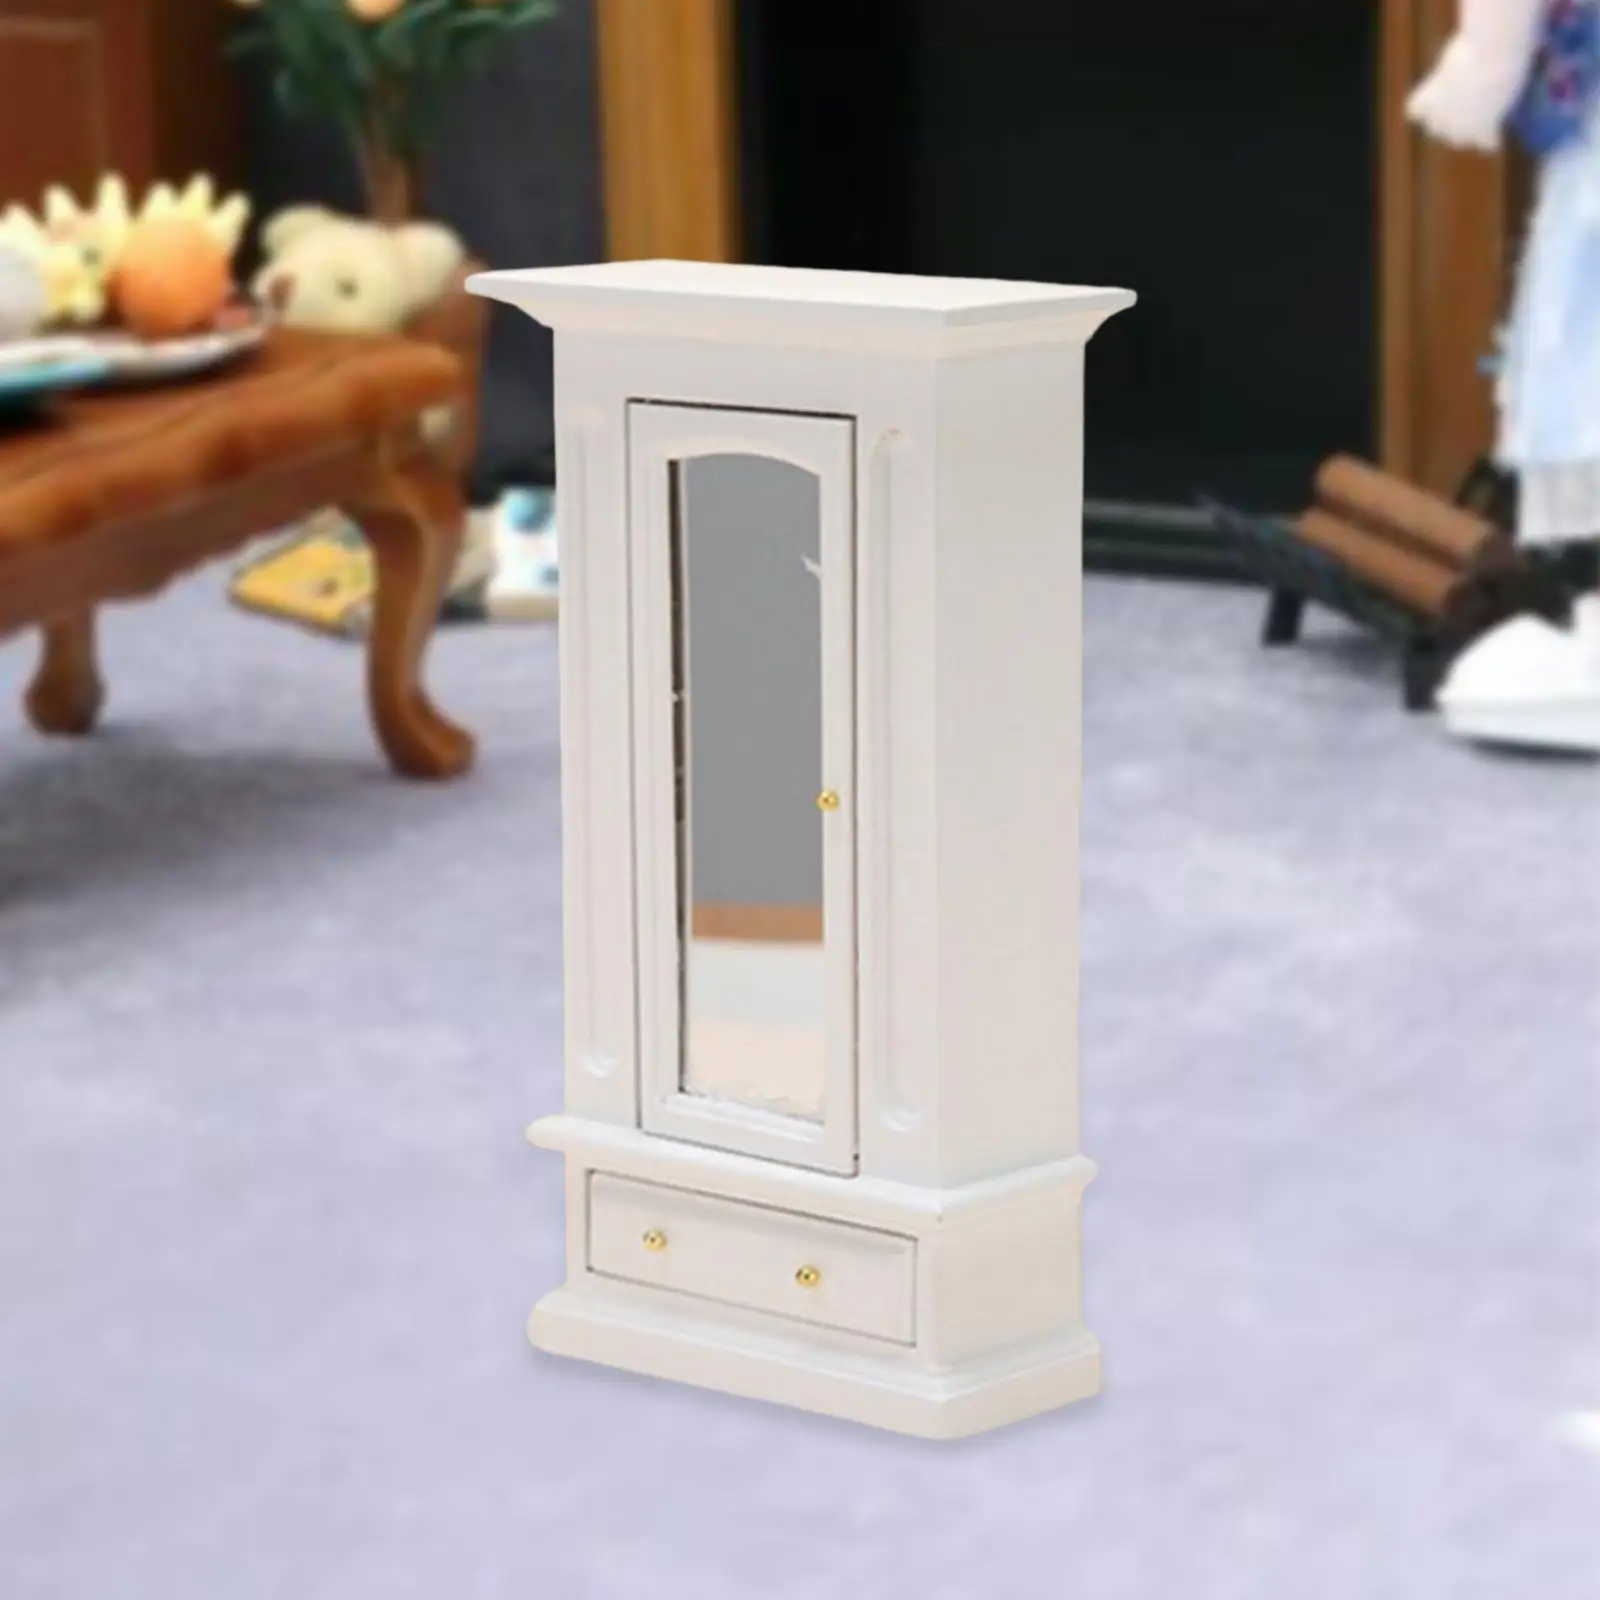 1:12 Dollhouse Wardrobe Storage Stand Model Wood Furniture for Bedroom